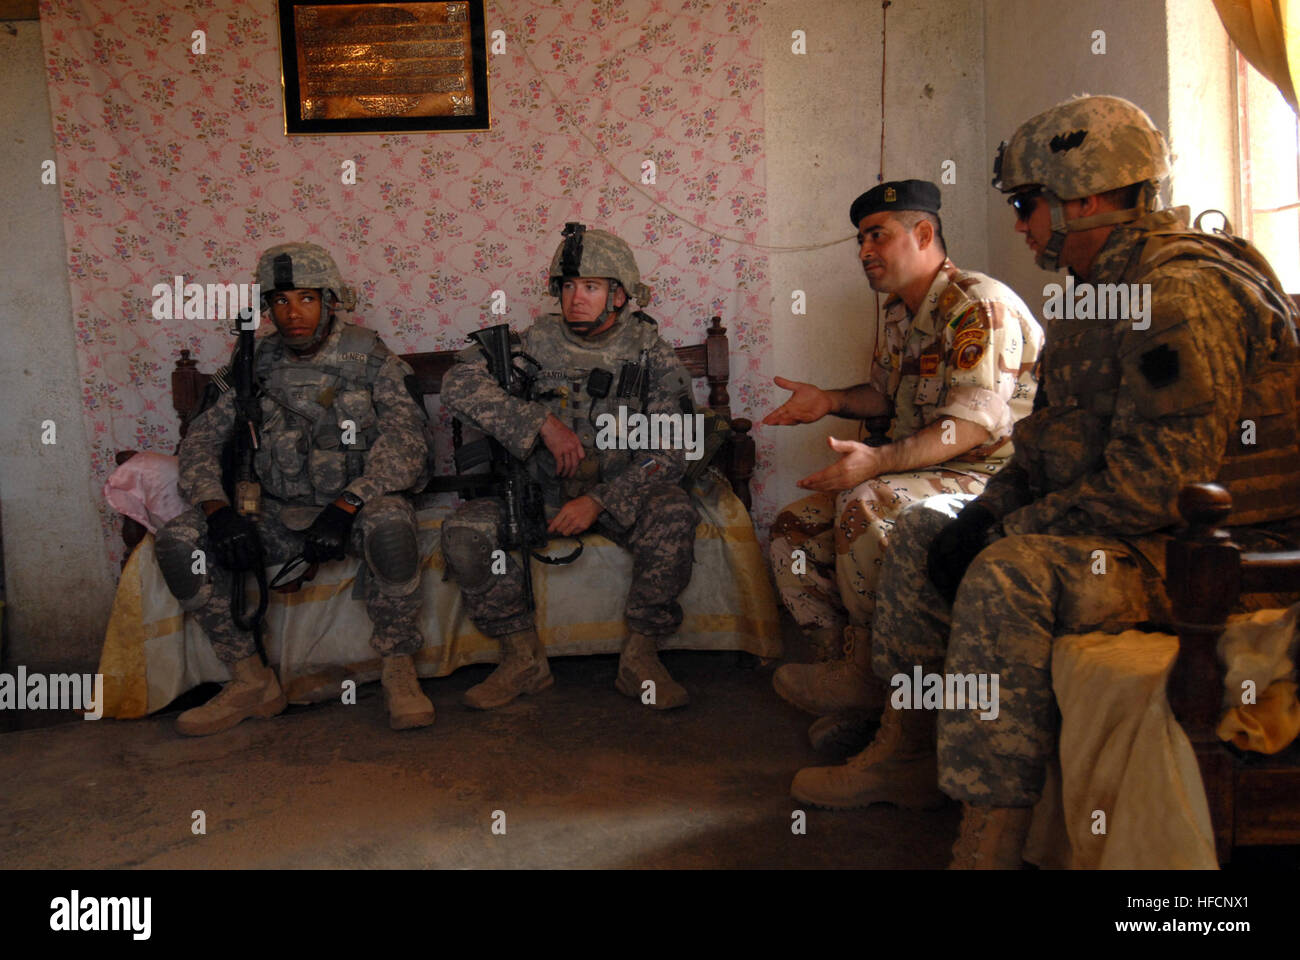 U.S. Soldiers attached to the 2nd Brigade, 1st Infantry Division, along with Iraqi soldiers with the 6th Iraqi army, meet with the Sons of Iraq at their headquarters in the province of Nassir Wa Salam in Abu Ghraib, Iraq, on May 16. Patrol in Abu Ghraib 174026 Stock Photo